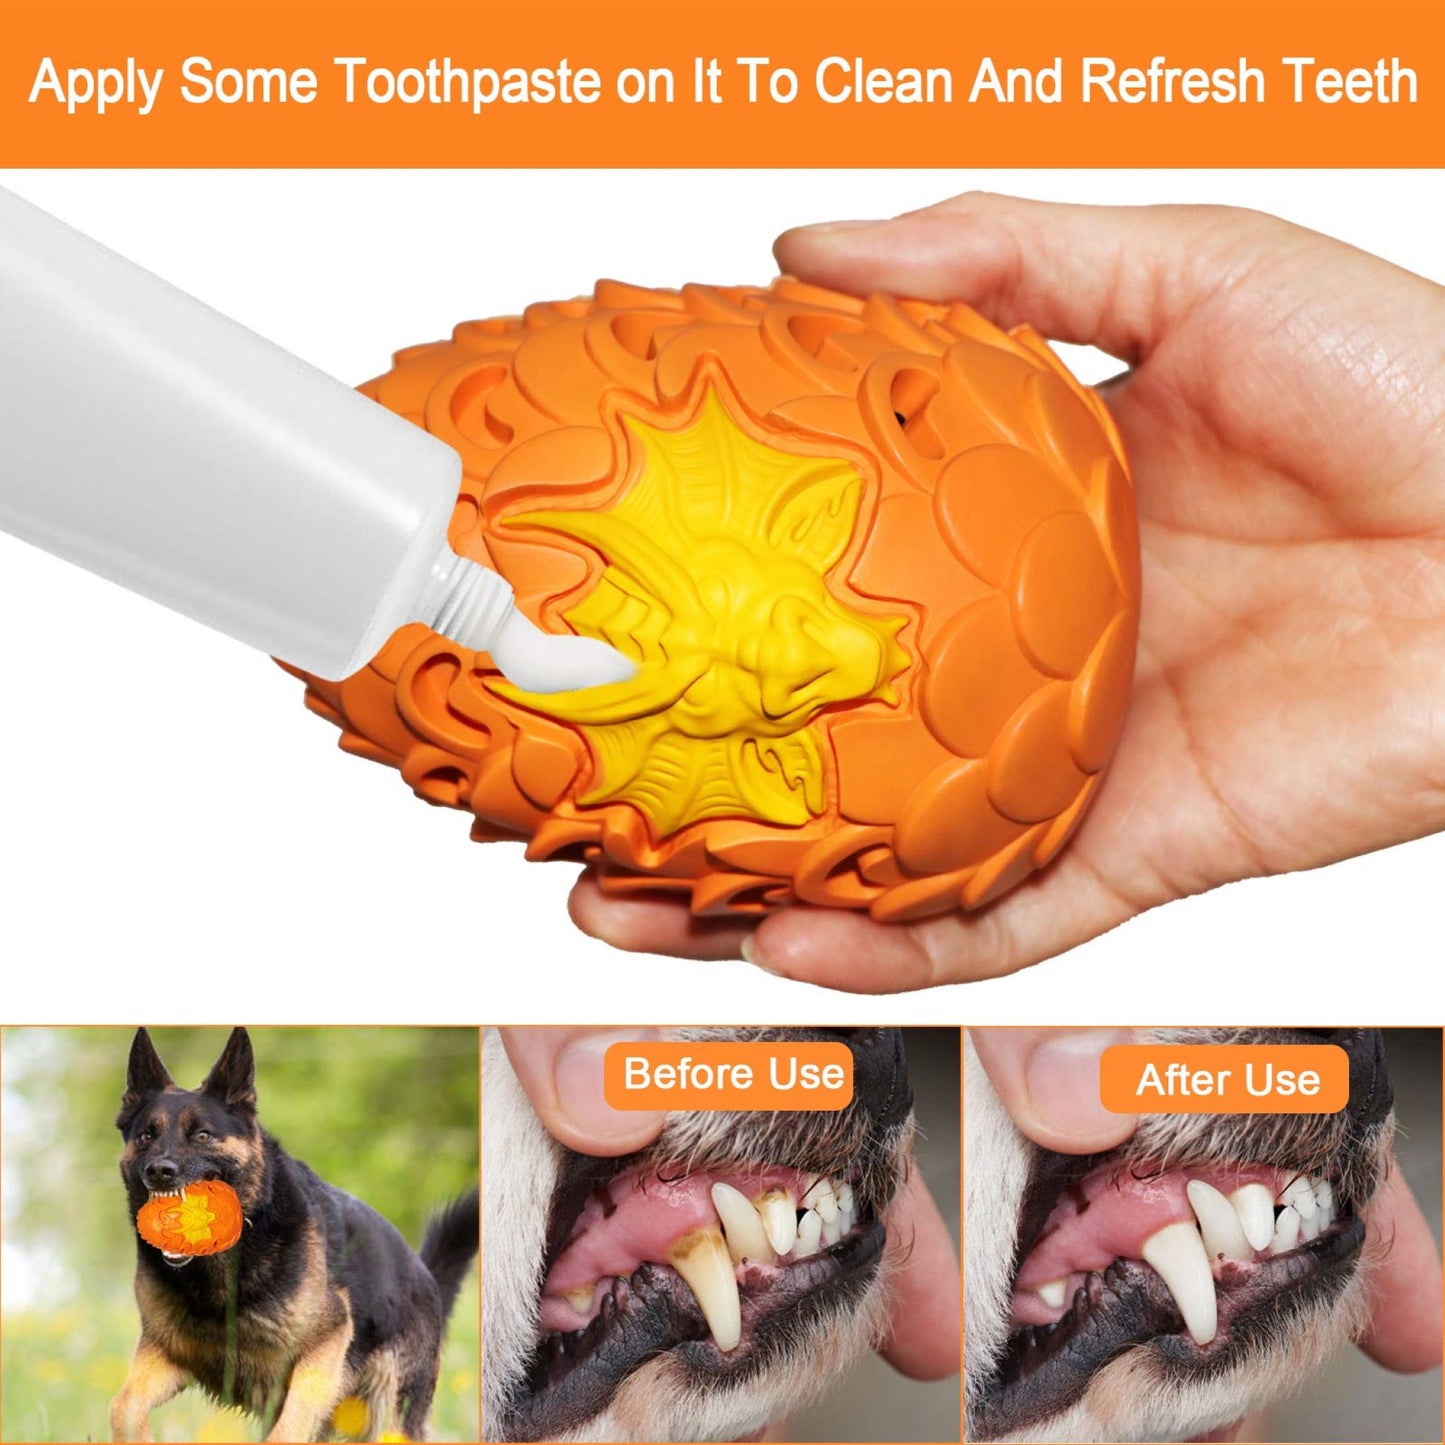 ROYAL PETS USA Indestructible, Durable & Tough Dragon Egg Dog Chew Toy for Aggressive Chewers, Slow Treat Dispensing Interactive Toys for S,M & L Breed - 100% NATURAL RUBBER -10000 BITES TESTED - UNIQUE DESIGN FOR ORAL CARE